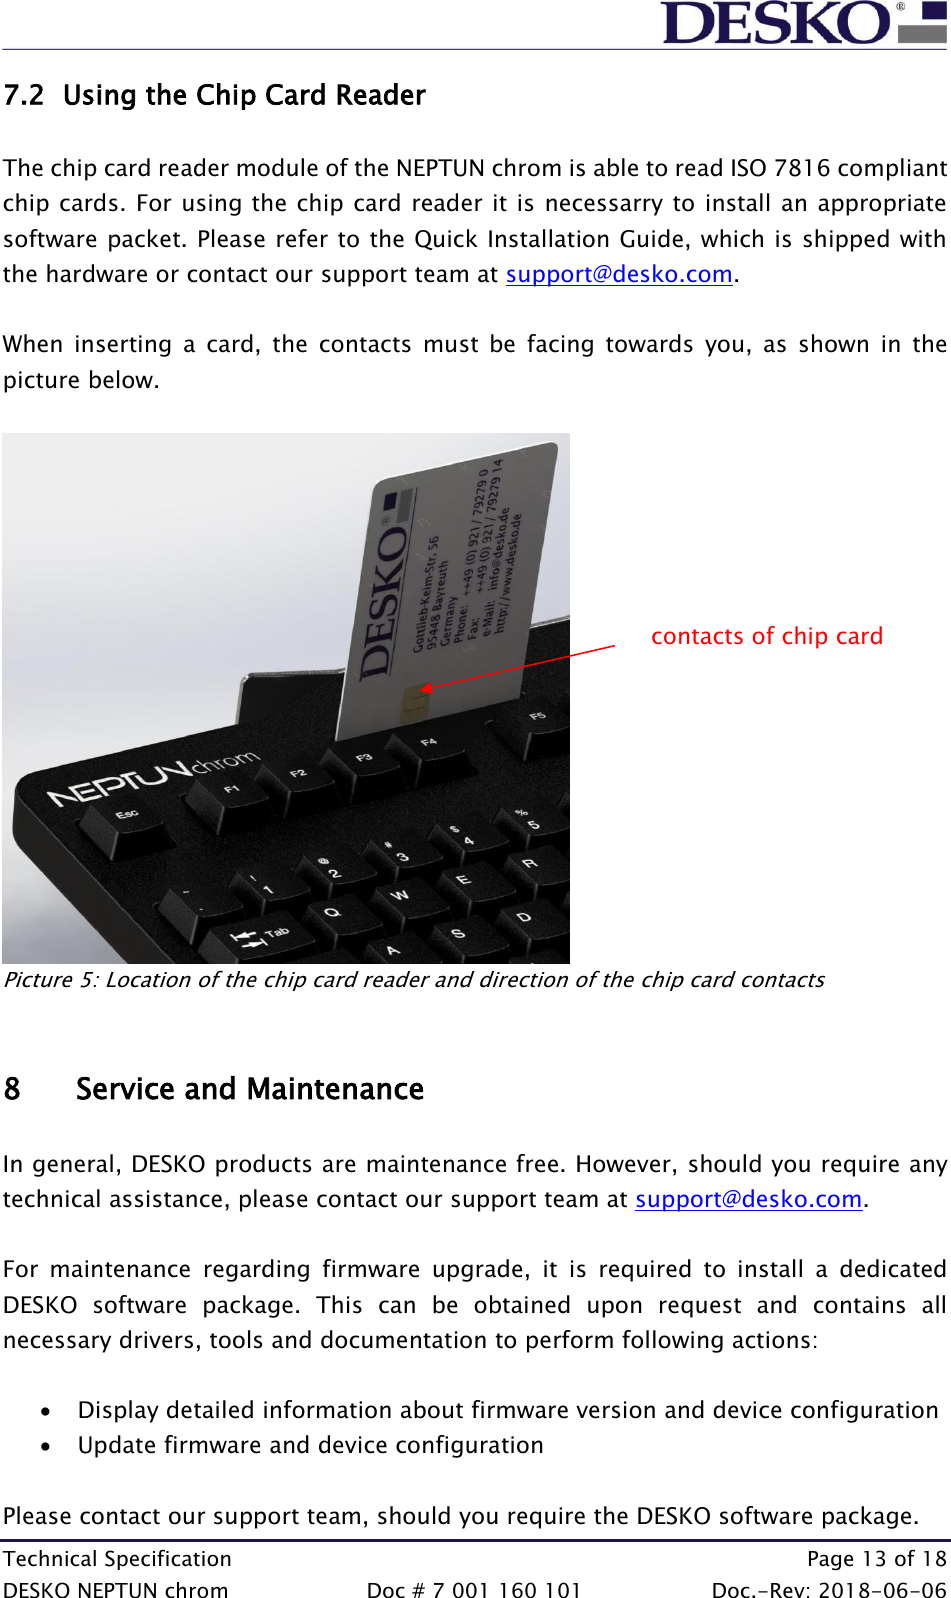  Technical Specification    Page 13 of 18 DESKO NEPTUN chrom  Doc # 7 001 160 101  Doc.-Rev: 2018-06-06 7.2 Using the Chip Card Reader  The chip card reader module of the NEPTUN chrom is able to read ISO 7816 compliant chip cards. For using the chip card reader it is necessarry to install an appropriate software packet. Please refer to the Quick Installation Guide, which is shipped with the hardware or contact our support team at support@desko.com.    When  inserting  a  card,  the  contacts  must  be  facing  towards  you,  as  shown  in  the picture below.                  Picture 5: Location of the chip card reader and direction of the chip card contacts   8 Service and Maintenance  In general, DESKO products are maintenance free. However, should you require any technical assistance, please contact our support team at support@desko.com.  For  maintenance  regarding  firmware  upgrade,  it  is  required  to  install  a  dedicated DESKO  software  package.  This  can  be  obtained  upon  request  and  contains  all necessary drivers, tools and documentation to perform following actions:  • Display detailed information about firmware version and device configuration • Update firmware and device configuration  Please contact our support team, should you require the DESKO software package. contacts of chip card 